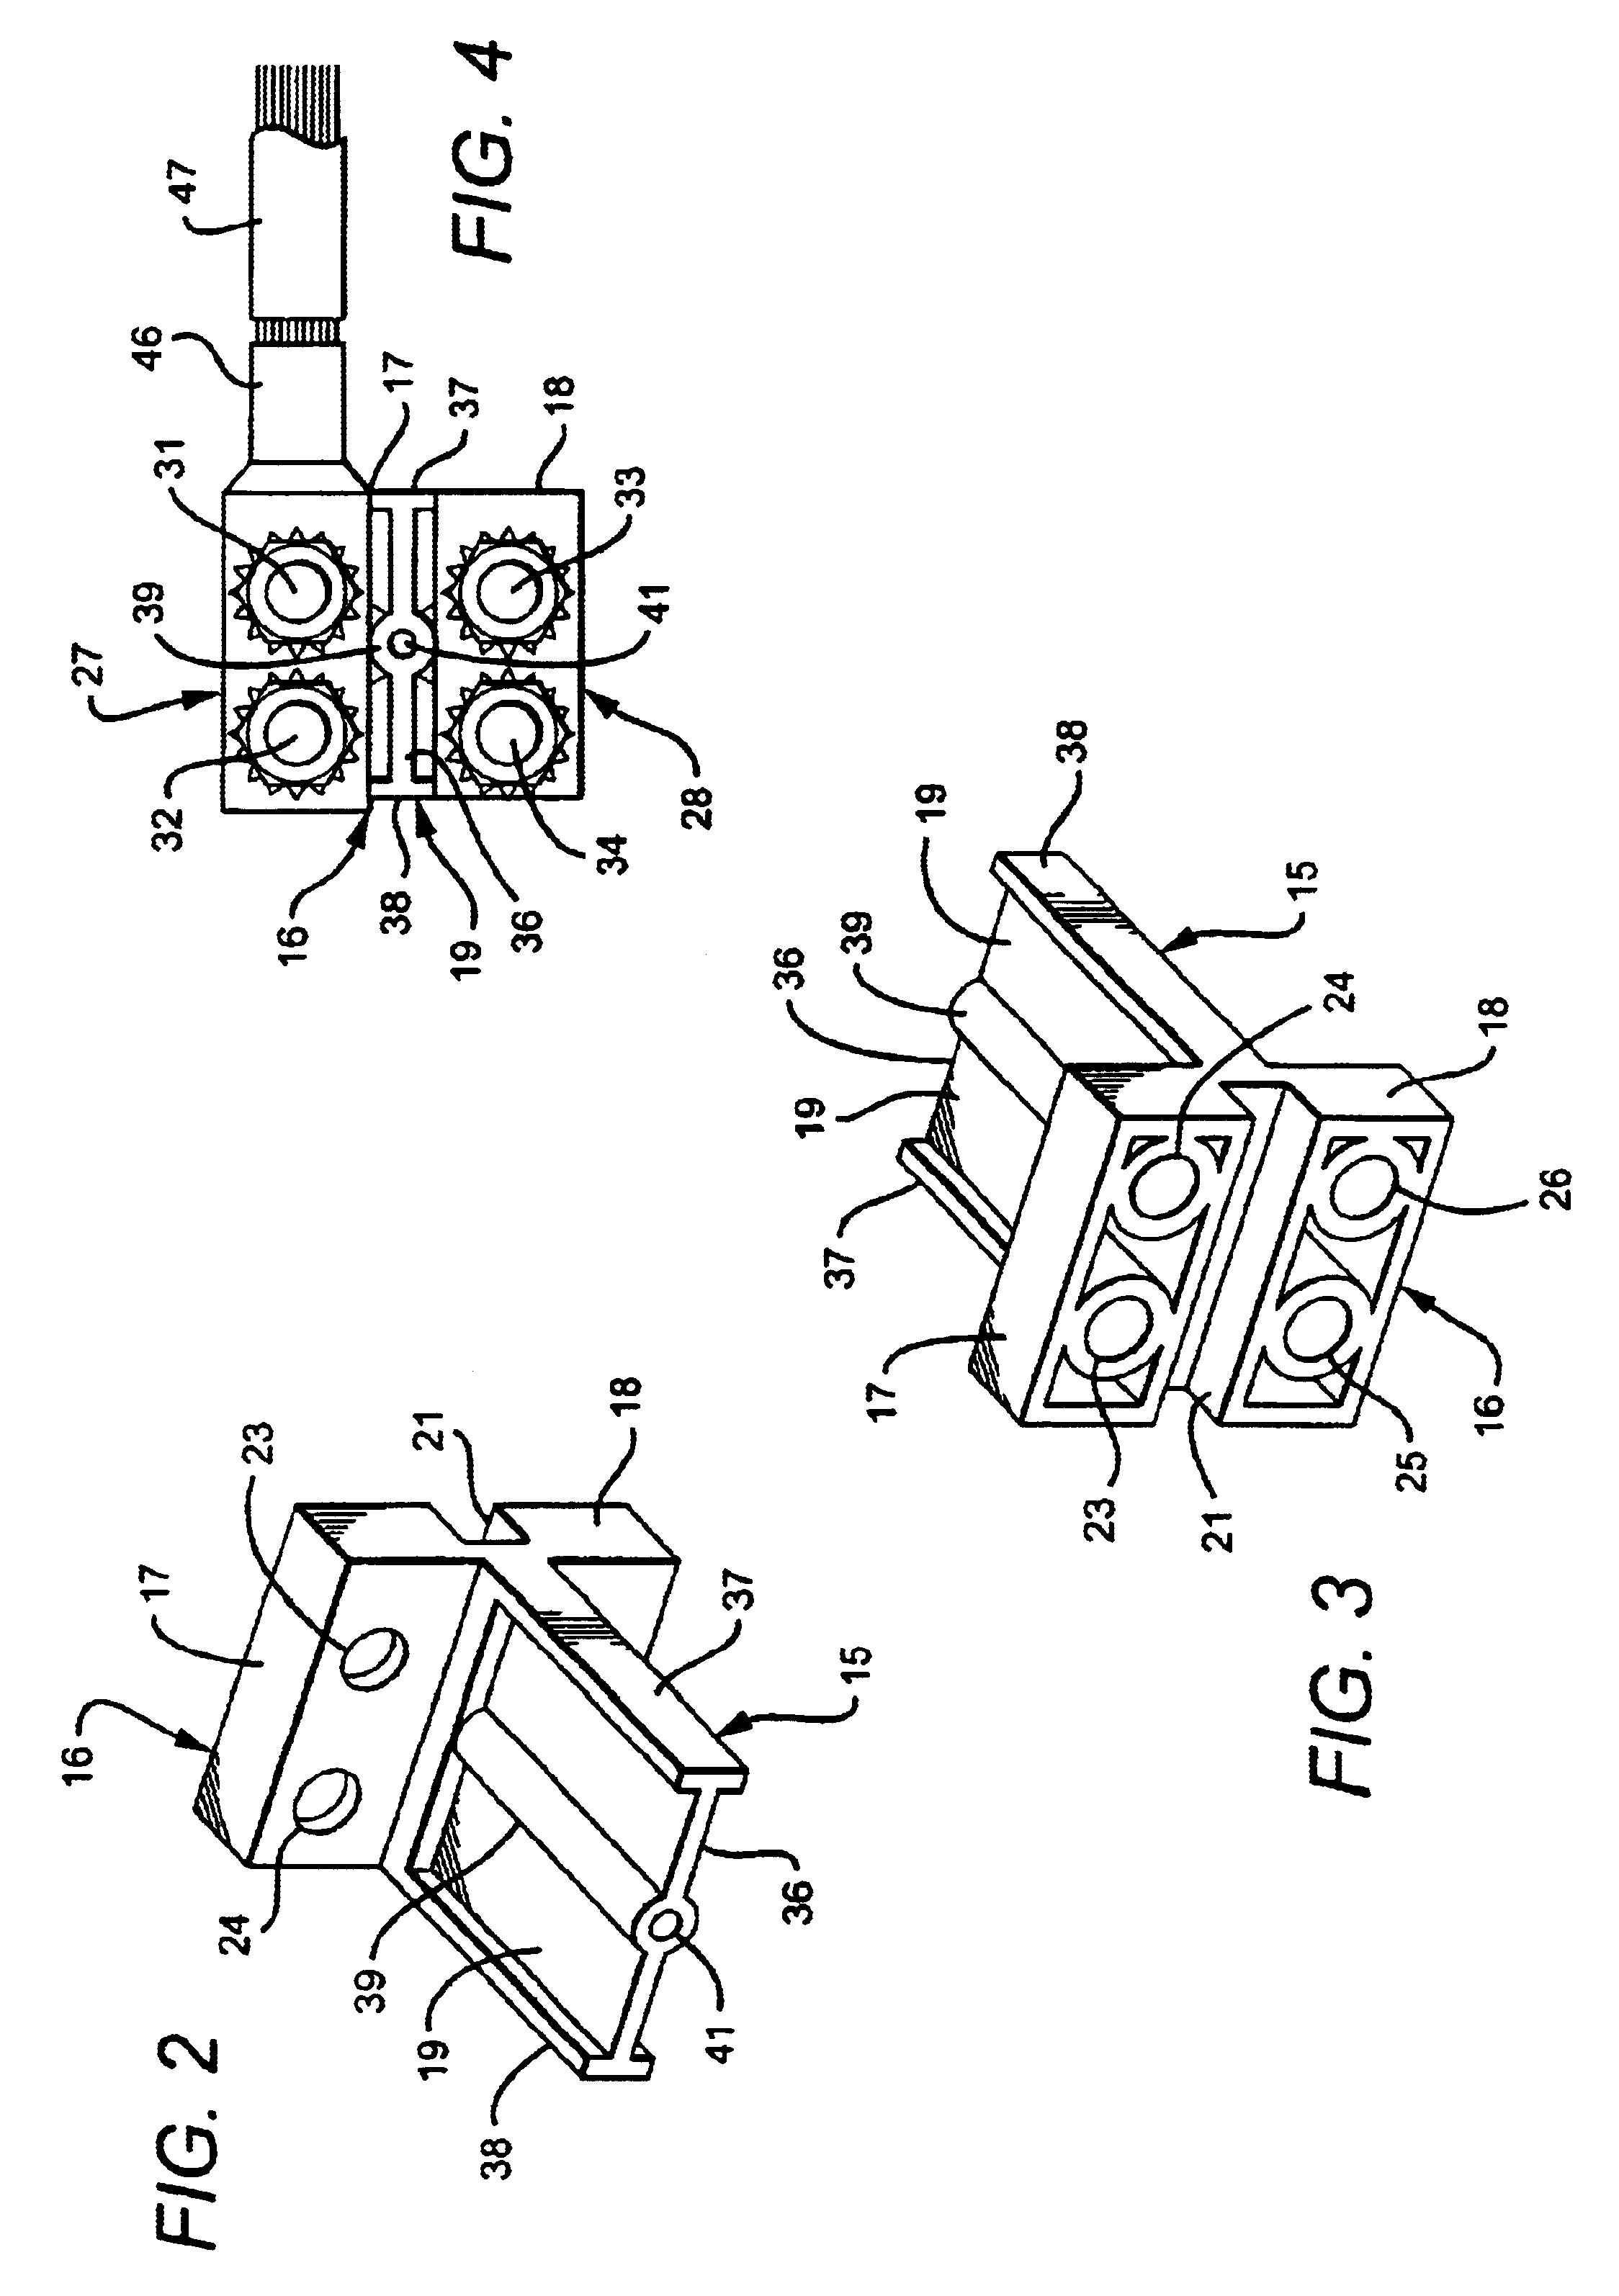 Electric apparatus with electric terminals and fused structures